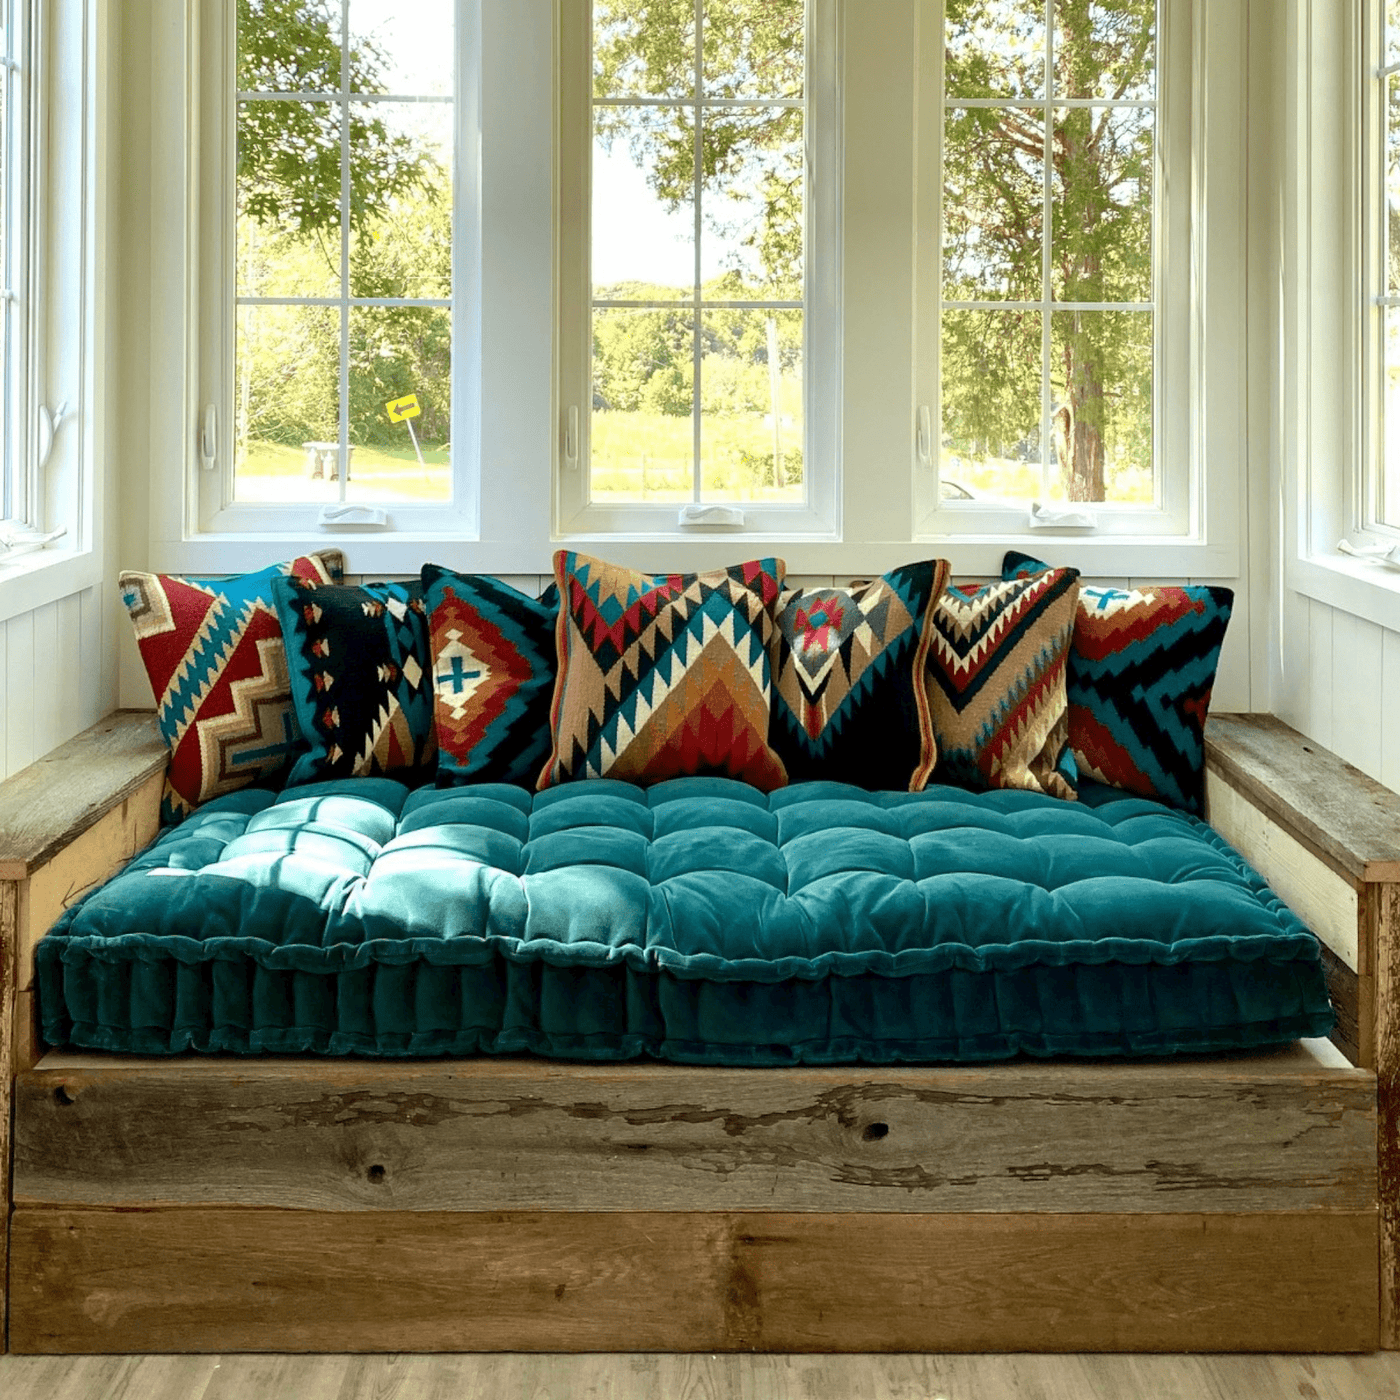 4 Tufted Wool Daybed Cushion, Home of Wool